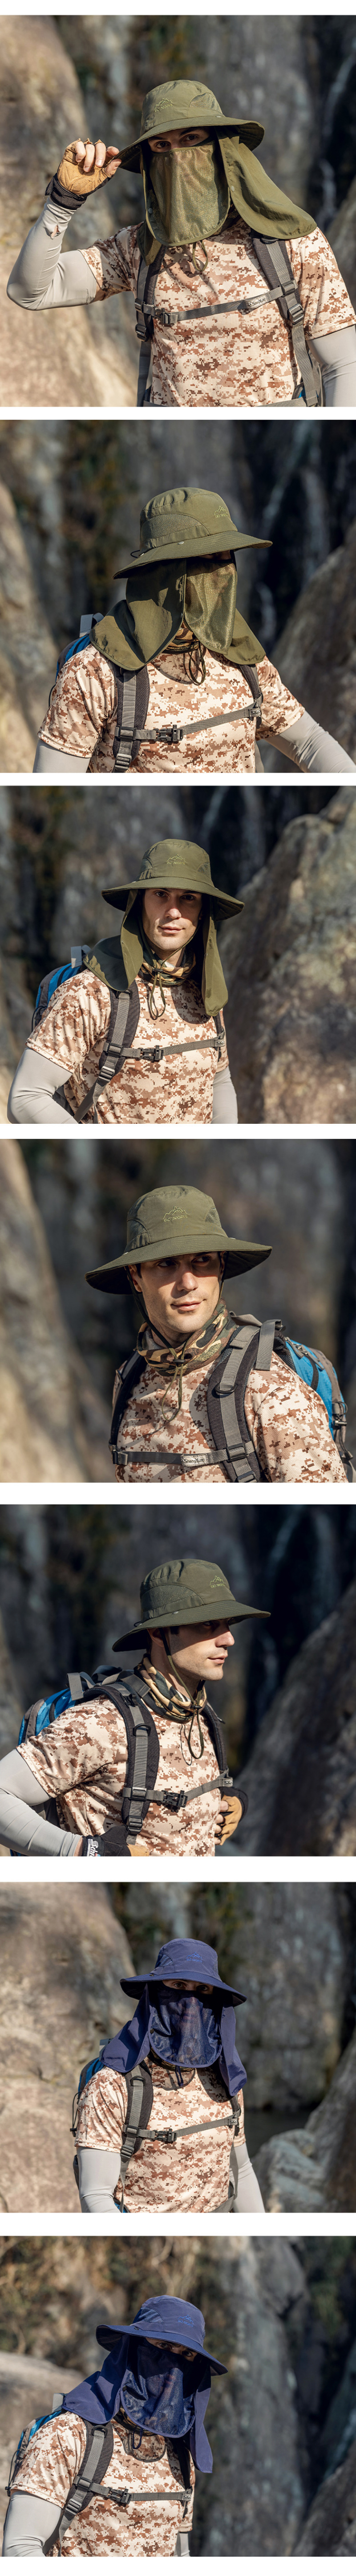 Outdoor-Dustproof-Full-Face-Protective-Hat-Anti-Saliva-Windproof-Mesh-Design-Face-Protection-Shield--1668647-1